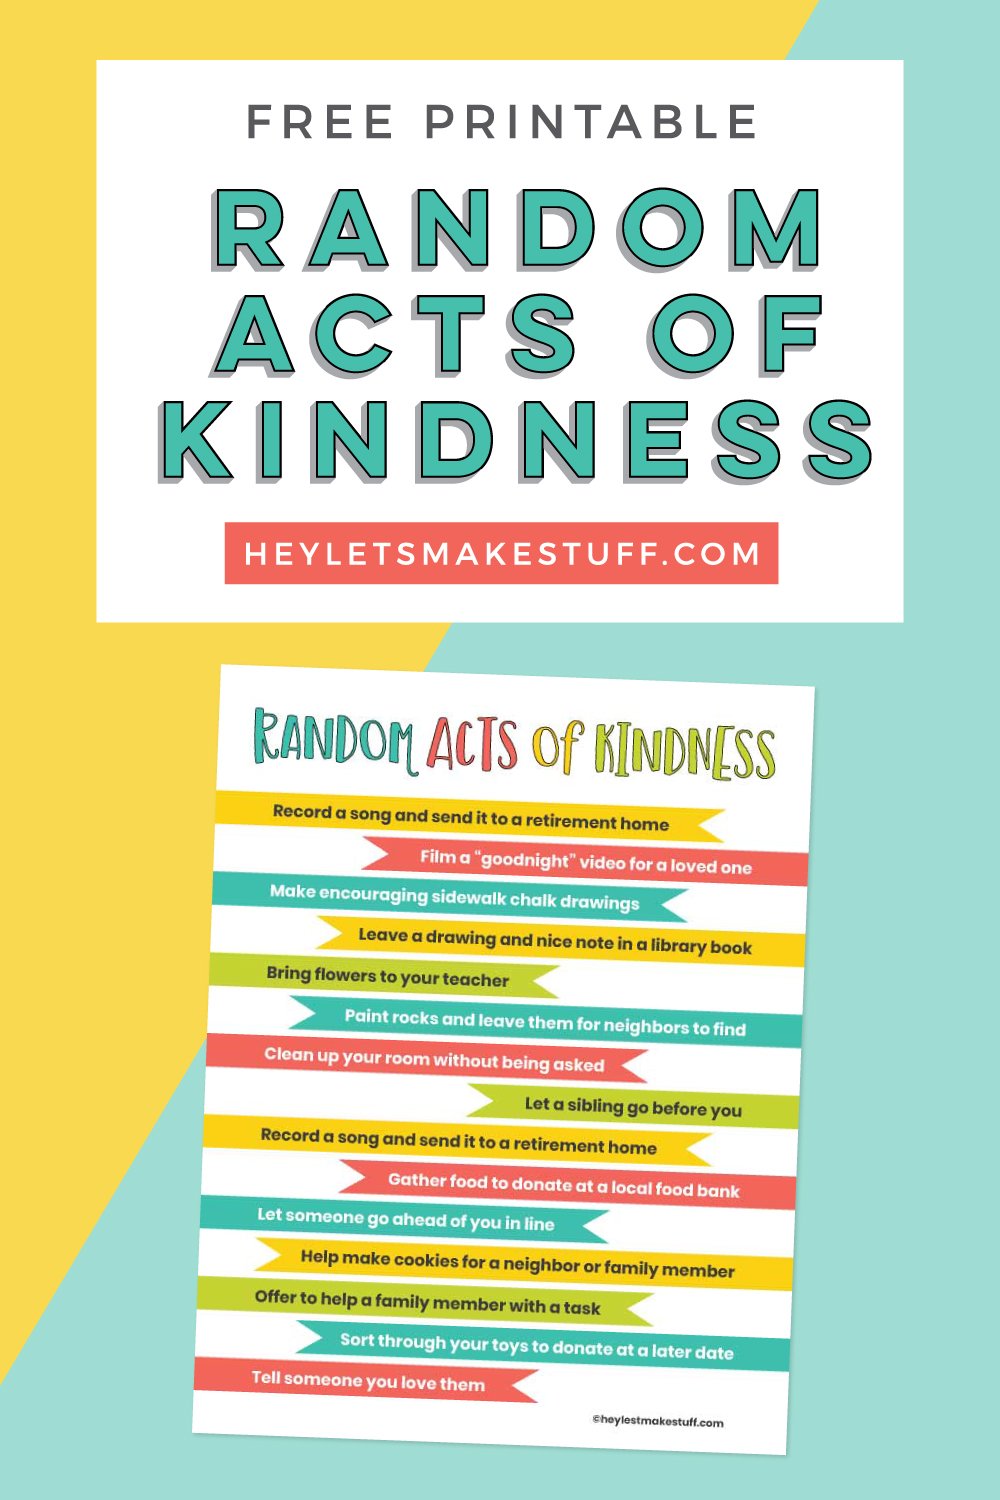 random-acts-of-kindness-for-kids-printable-hey-let-s-make-stuff